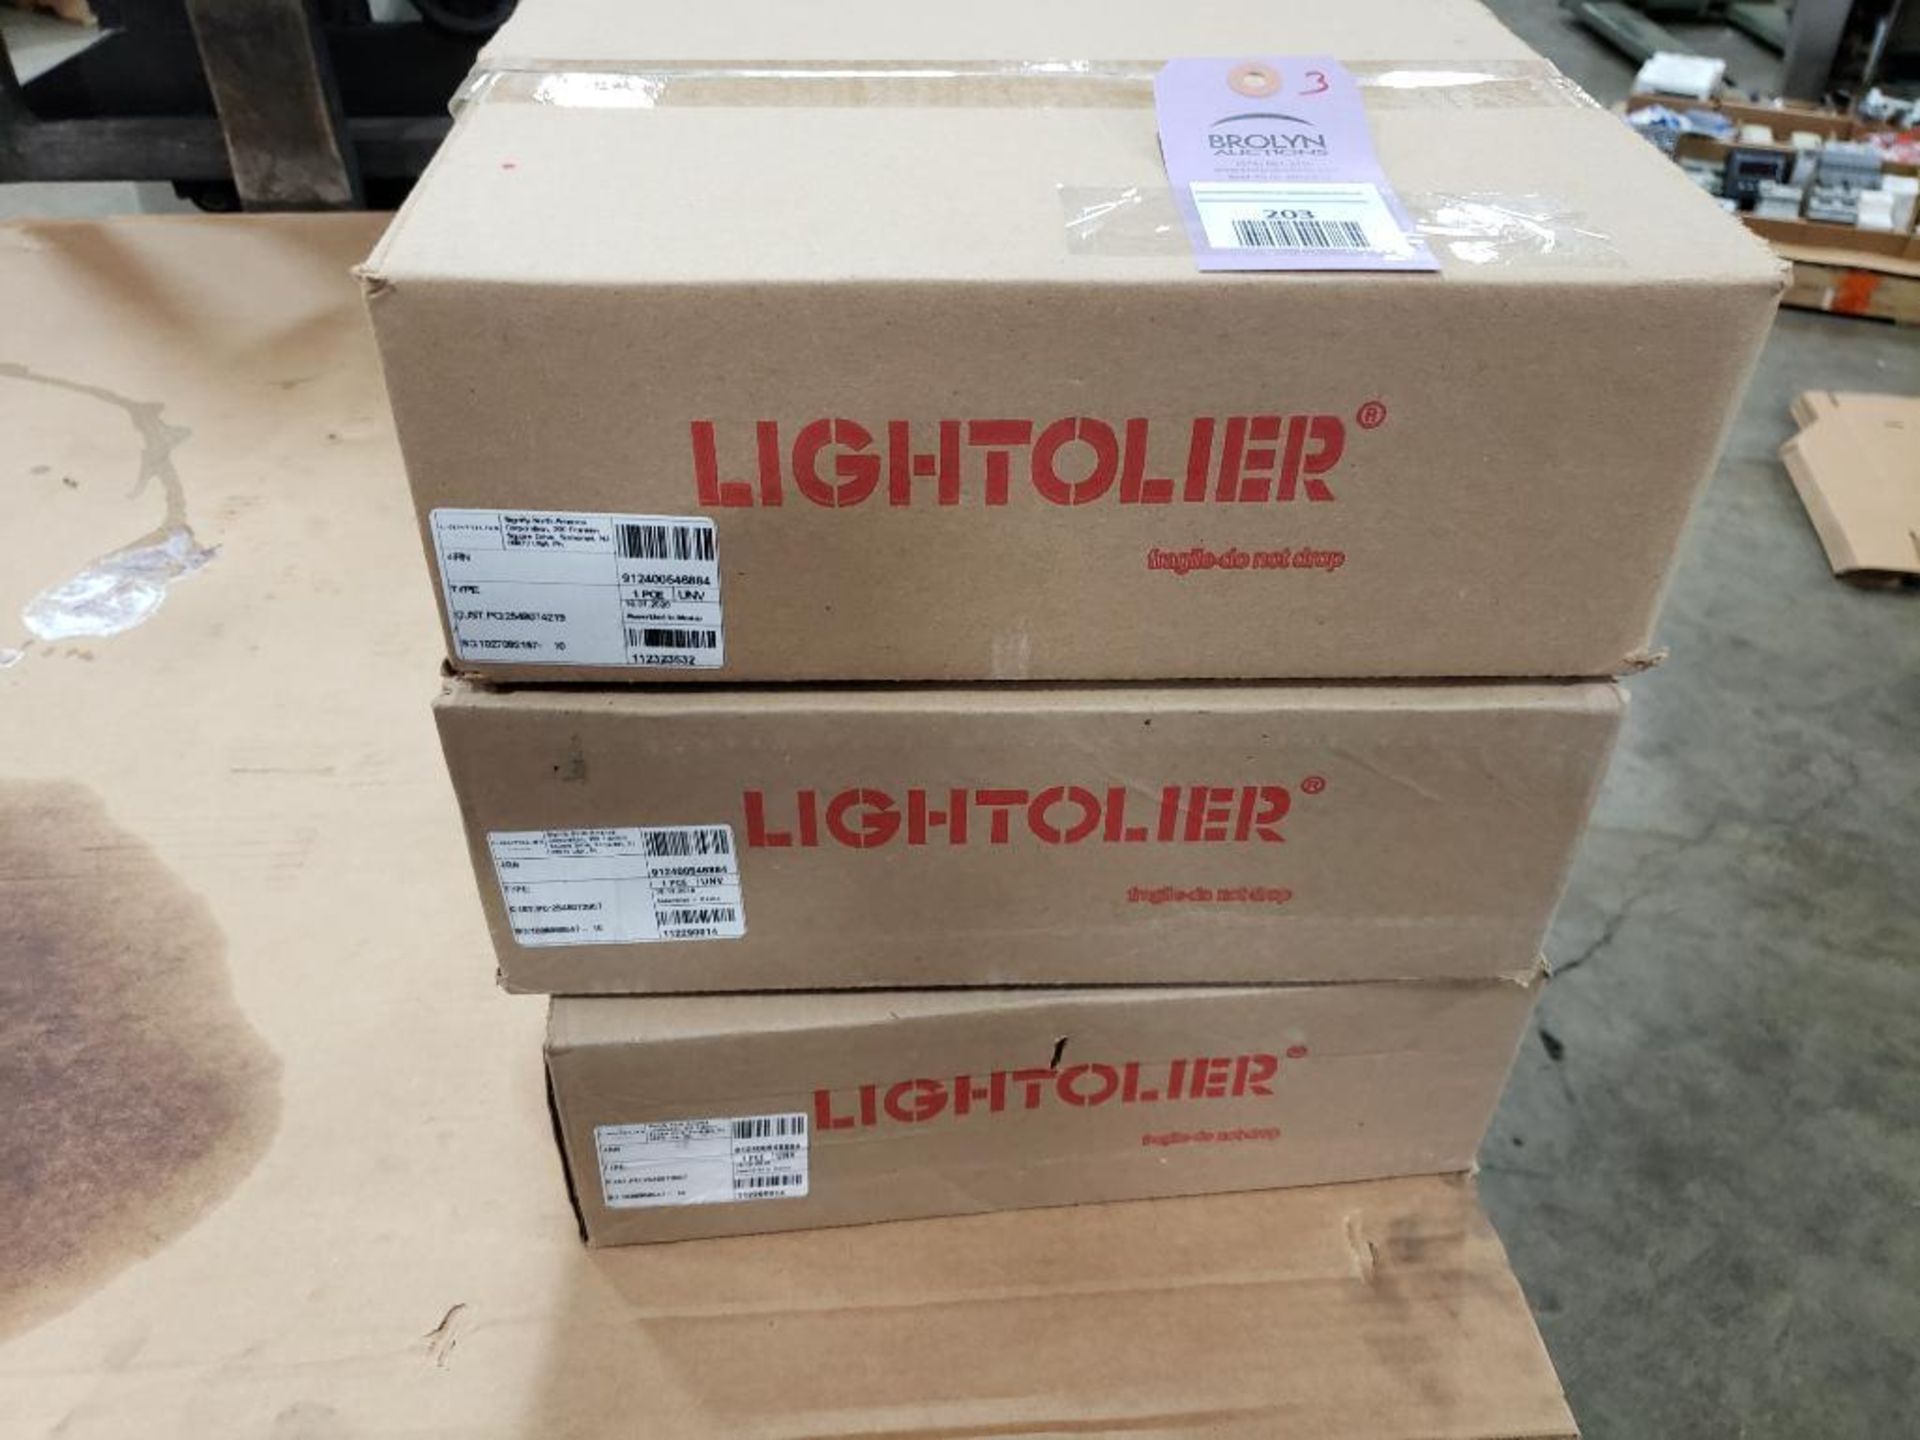 Qty 3 - Lightolier 912400546884 frame in 4" light fixture. New in box.